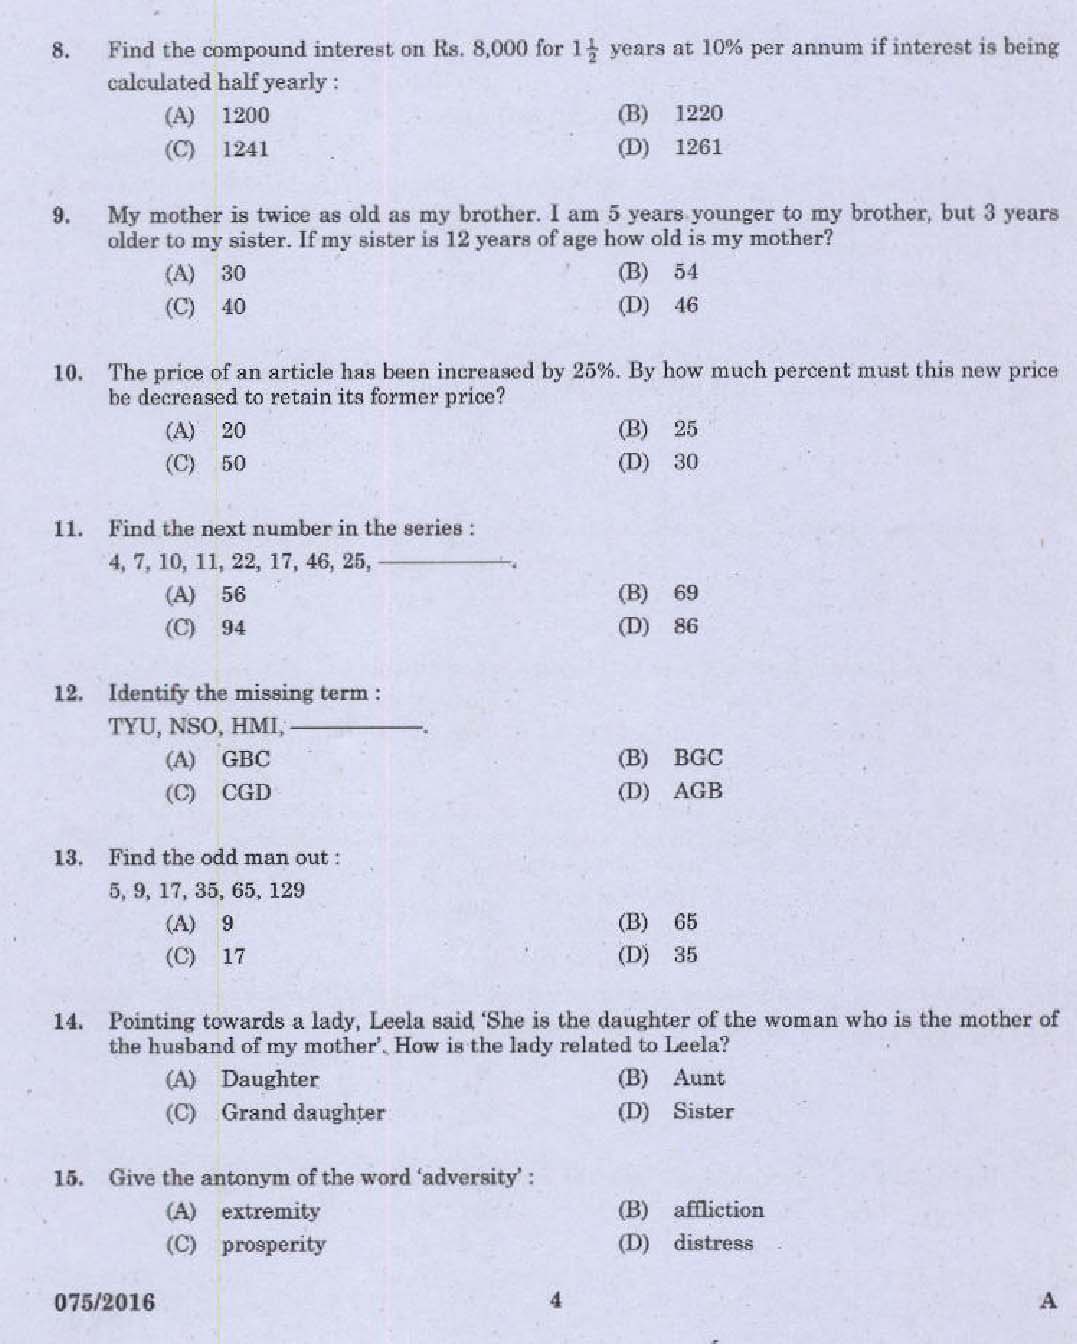 Kerala PSC Sub Inspector of Police Exam Question Code 0752016 2